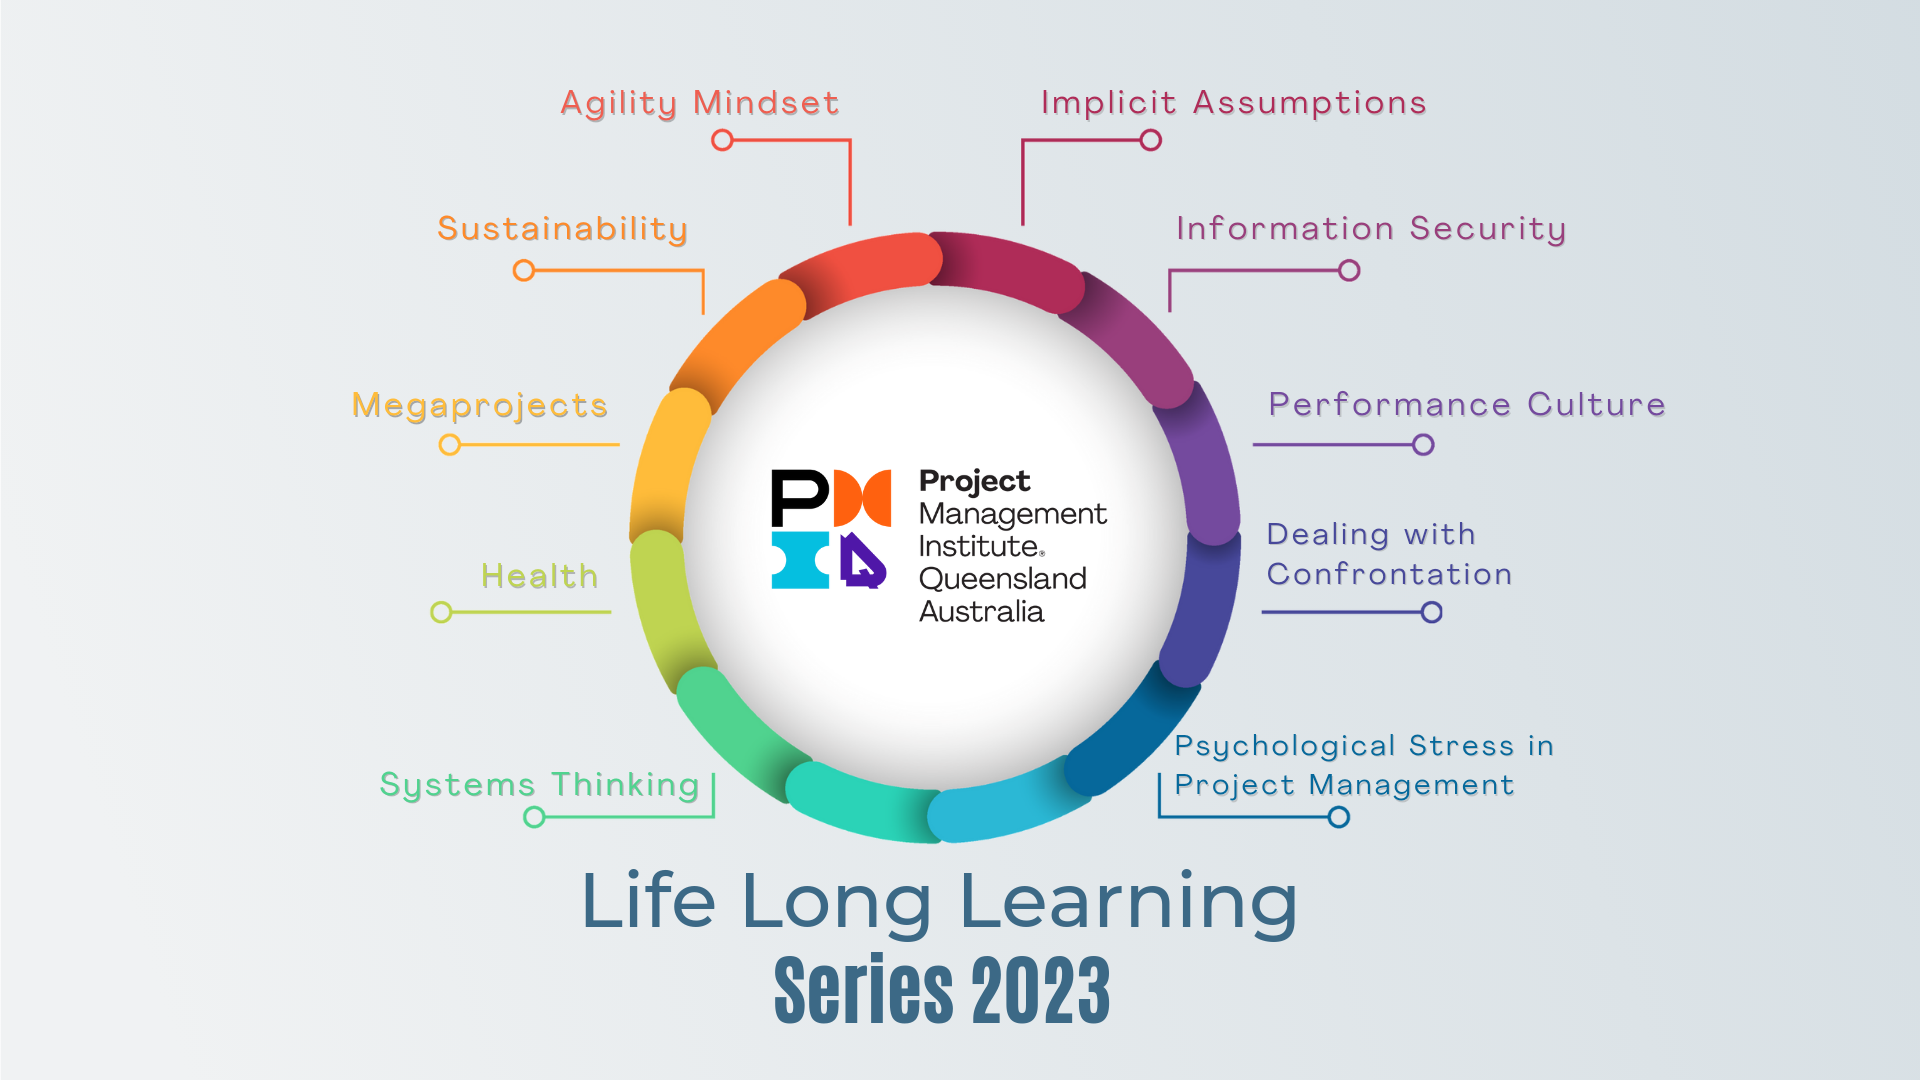 Revised-PMIQ-Lifelong-Learning-Series-2023.png